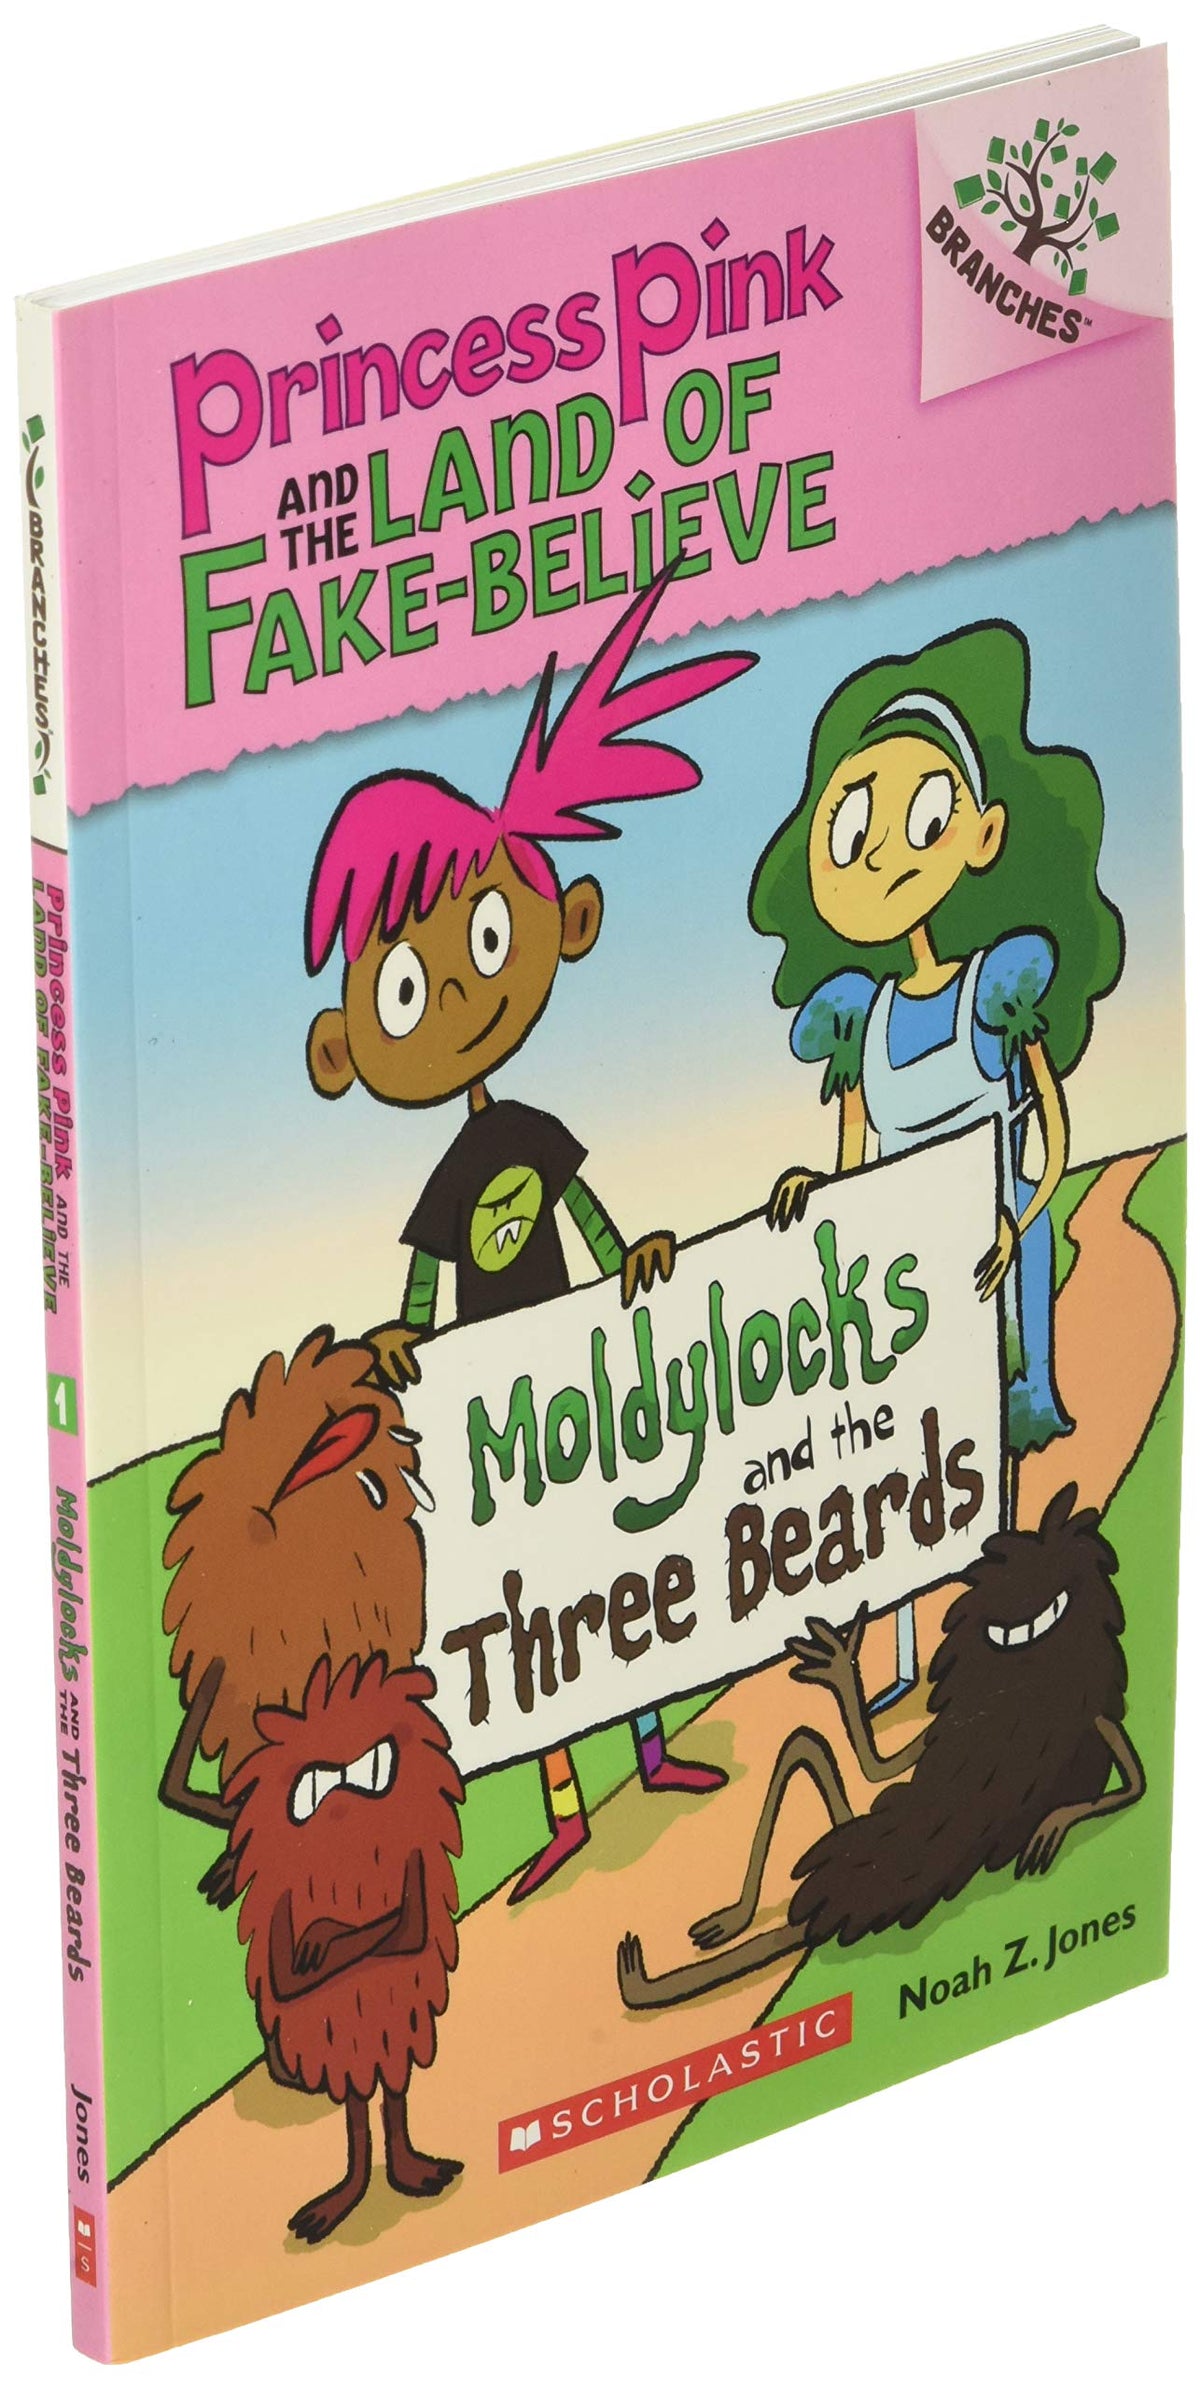 Princess Pink and the Land of Fake-Believe Vol. 1: Moldylocks and the Three Beards - Third Eye